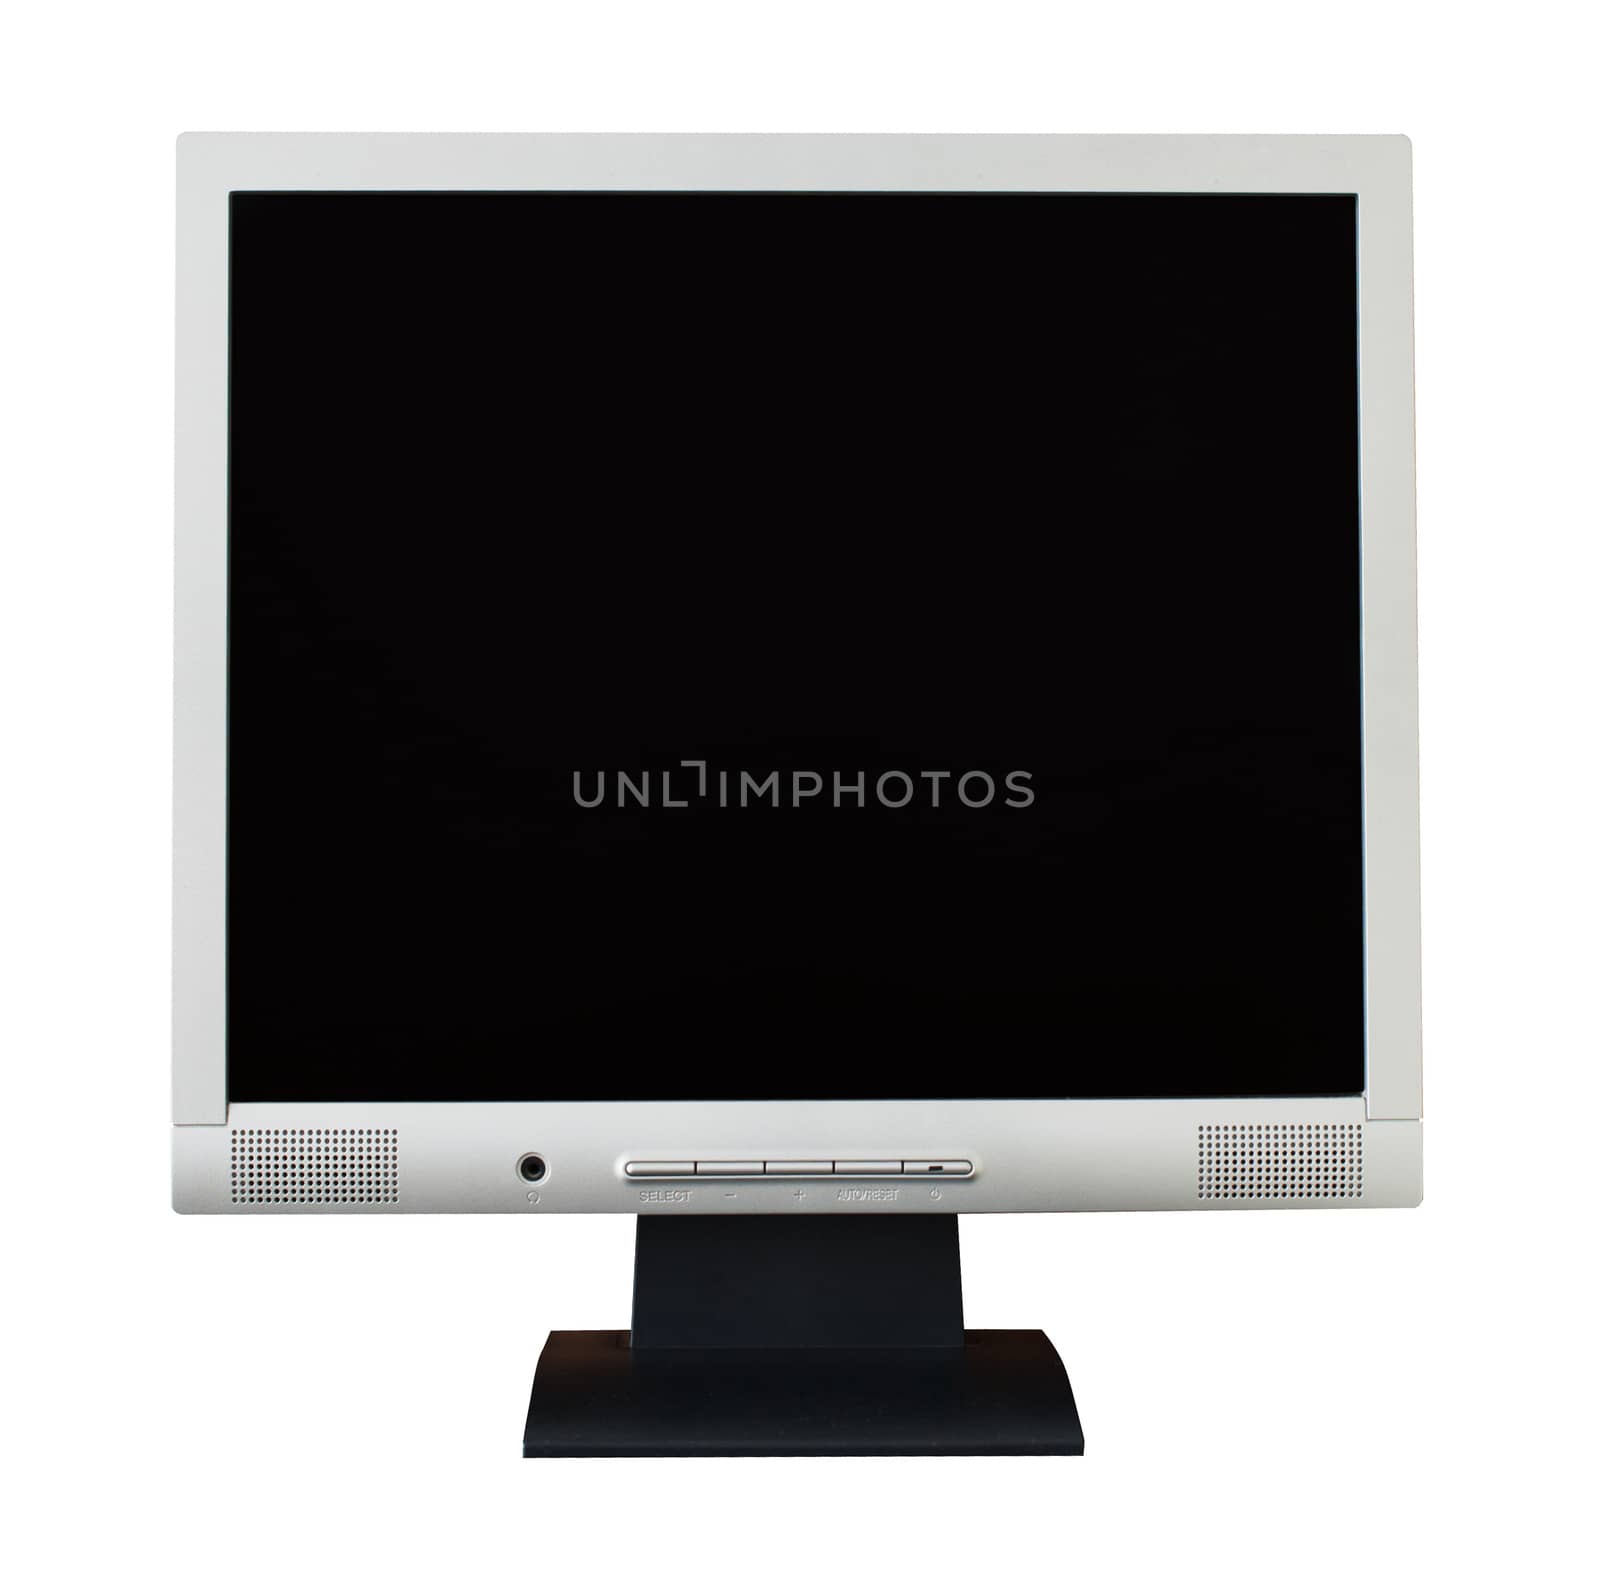 Monitor isolated on white background by maggee